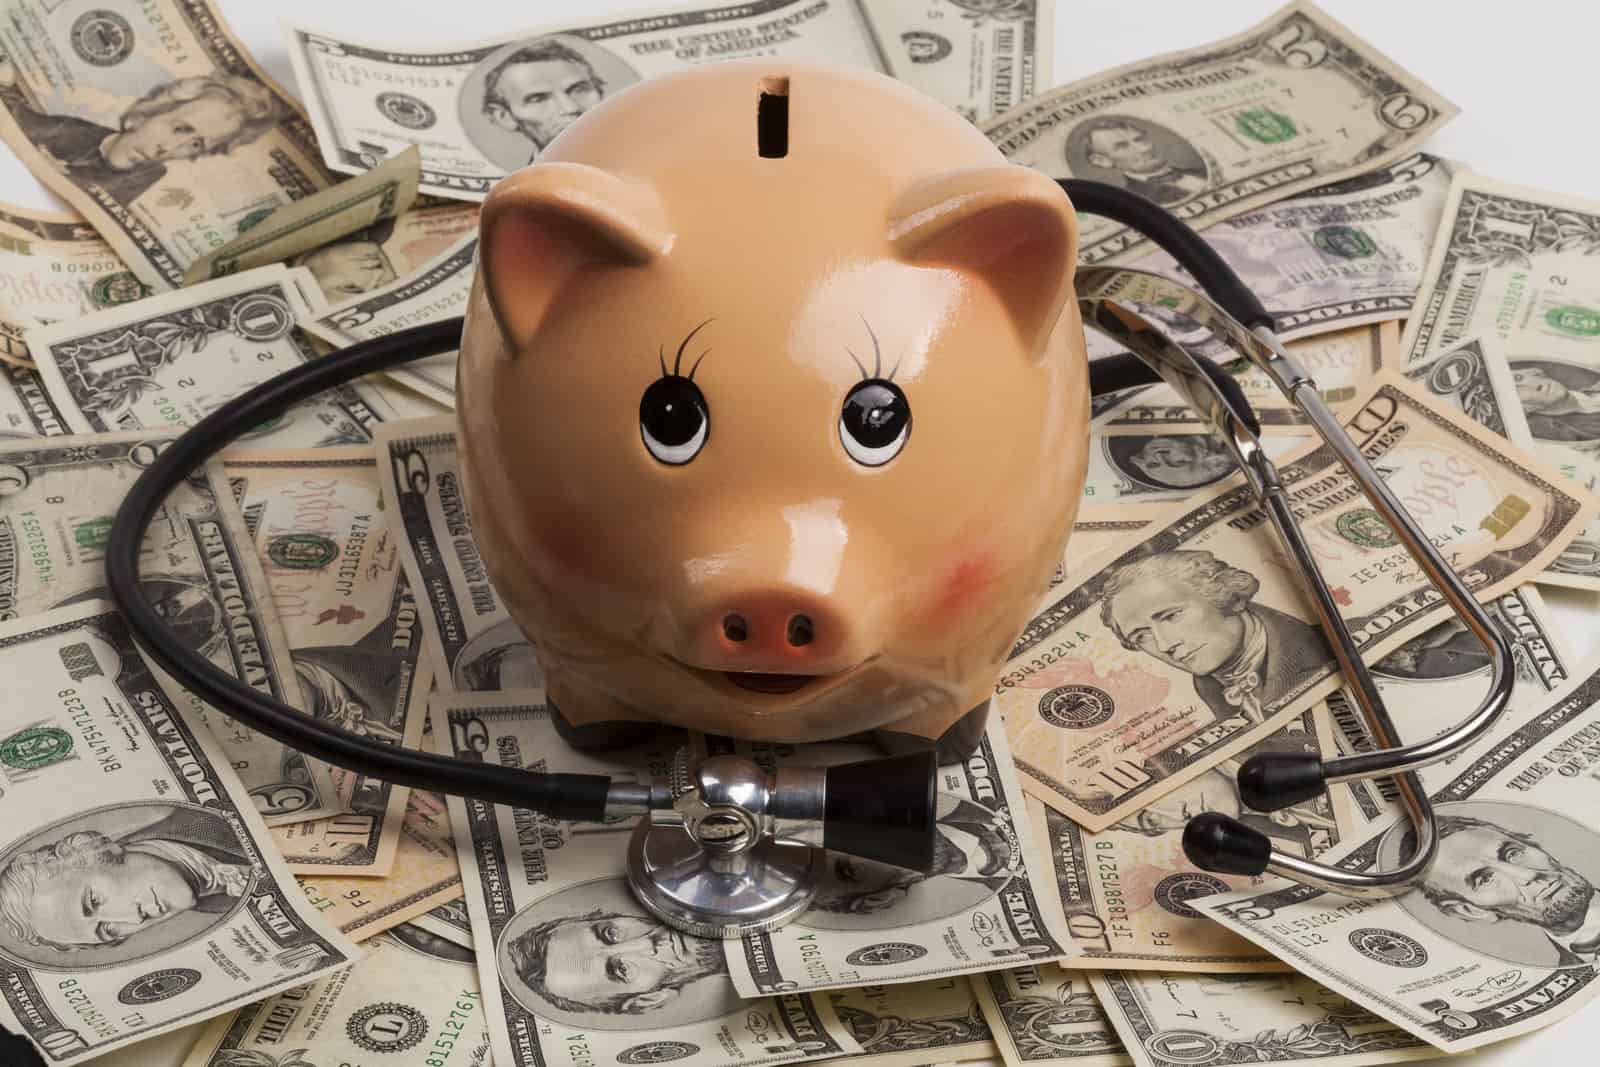 stethoscope with money and a piggy bank representing assessing financial health